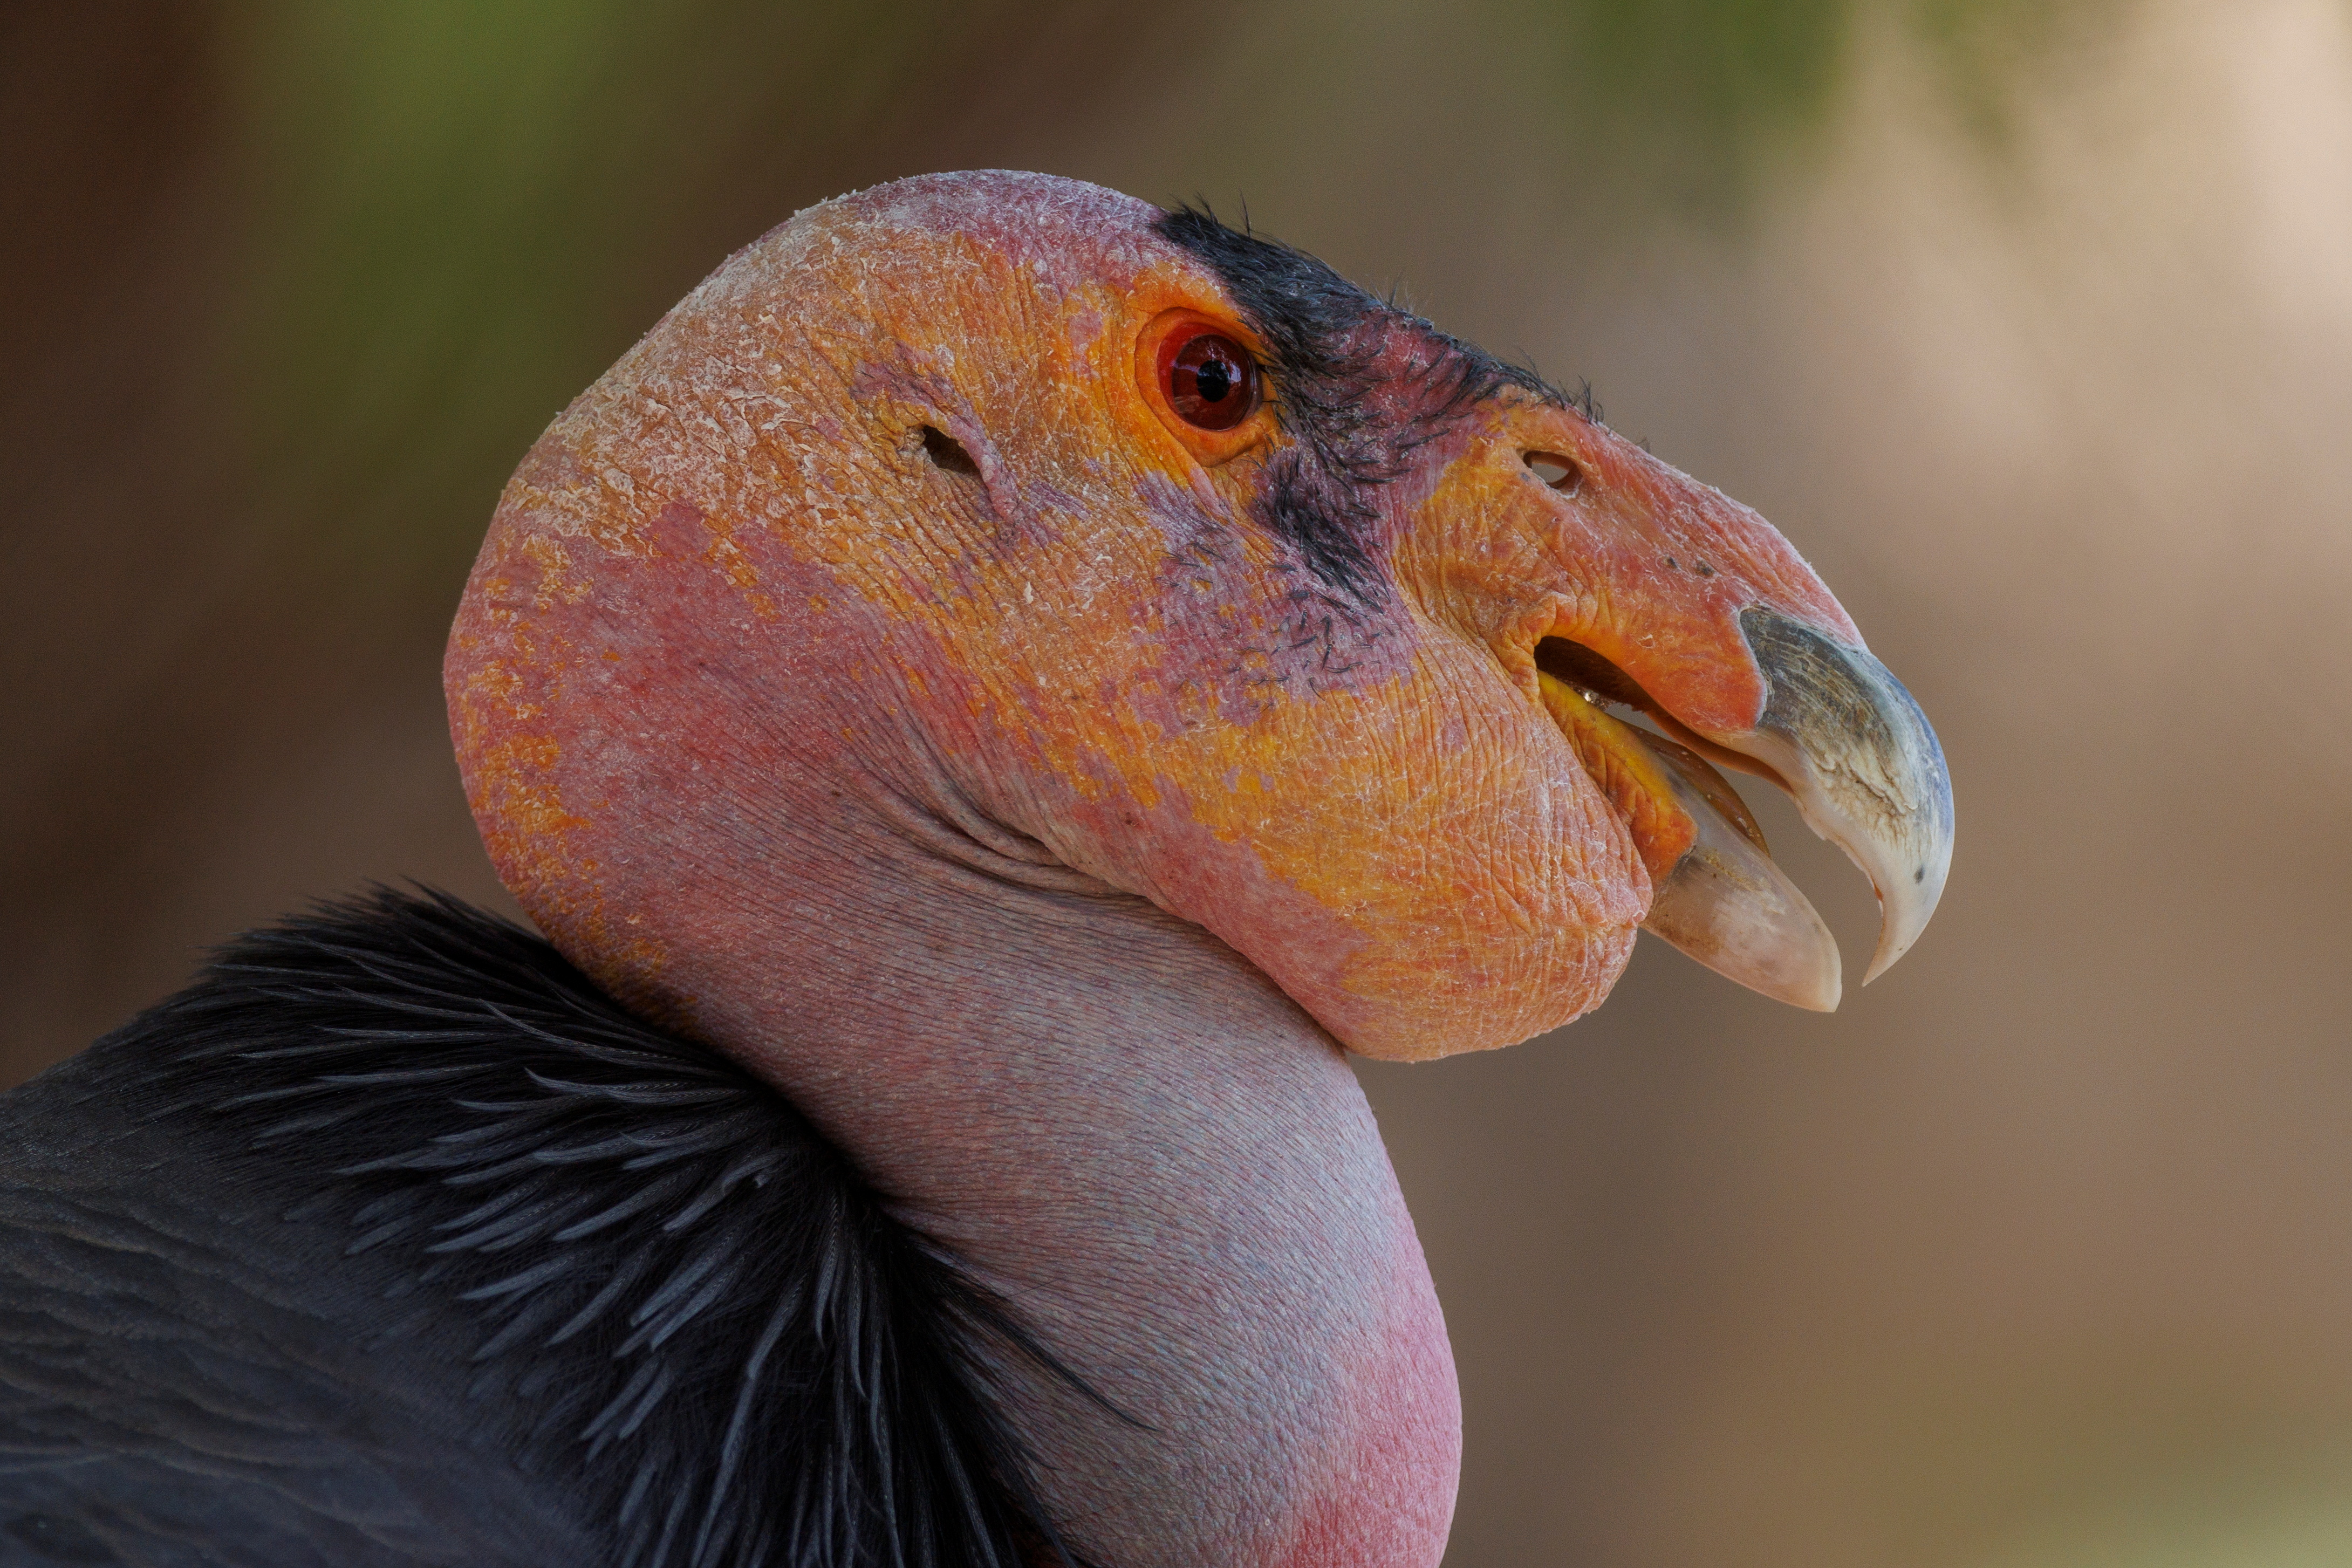 Confirmed hatchings of two California condor chicks from unfertilized eggs